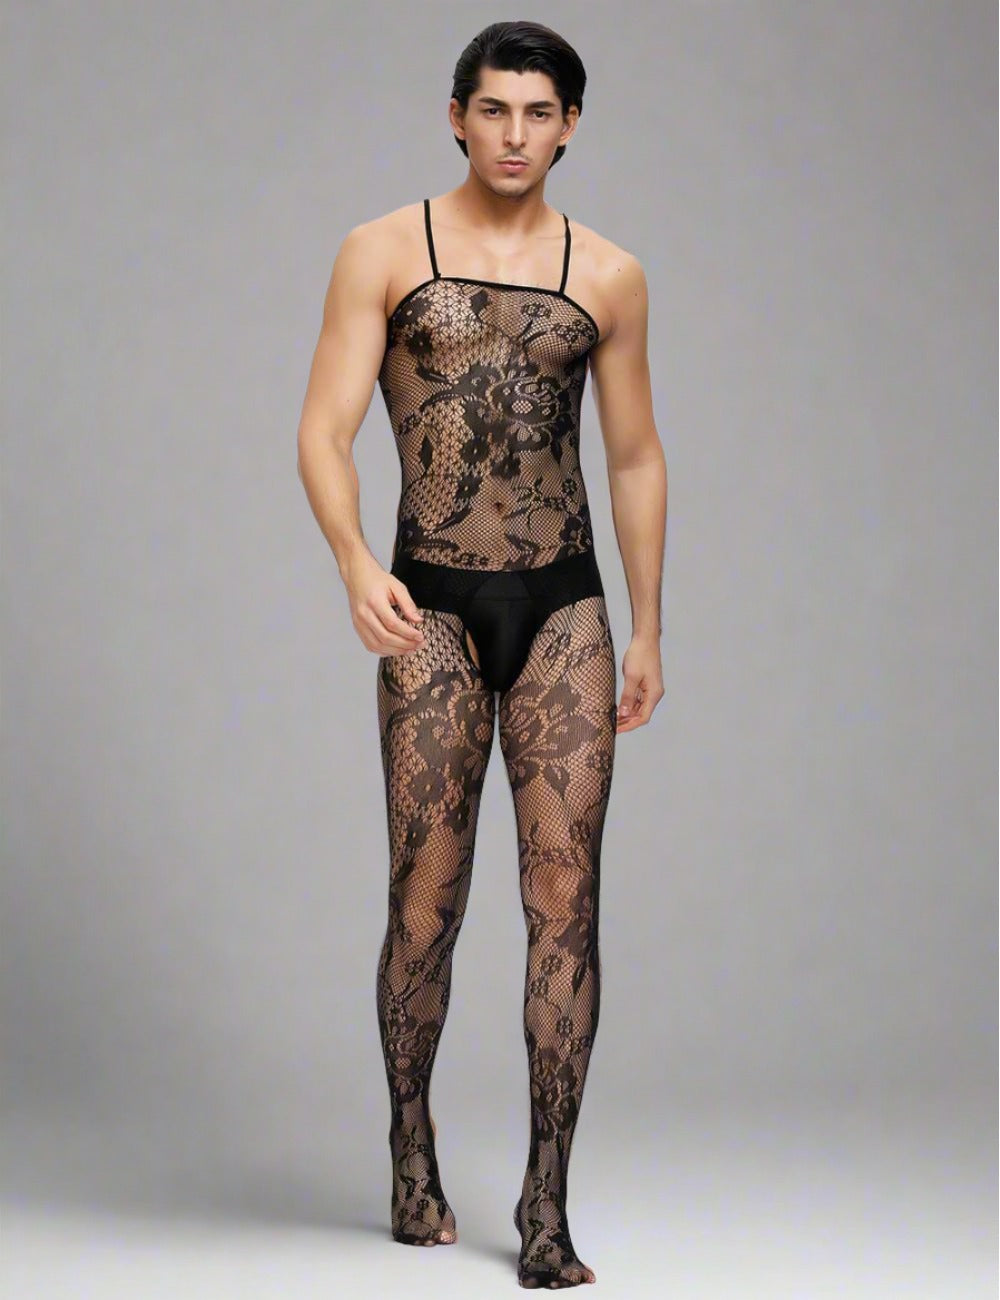 Scandals Floral Spaghetti Strap Body stocking Menswear Scandals Lingerie